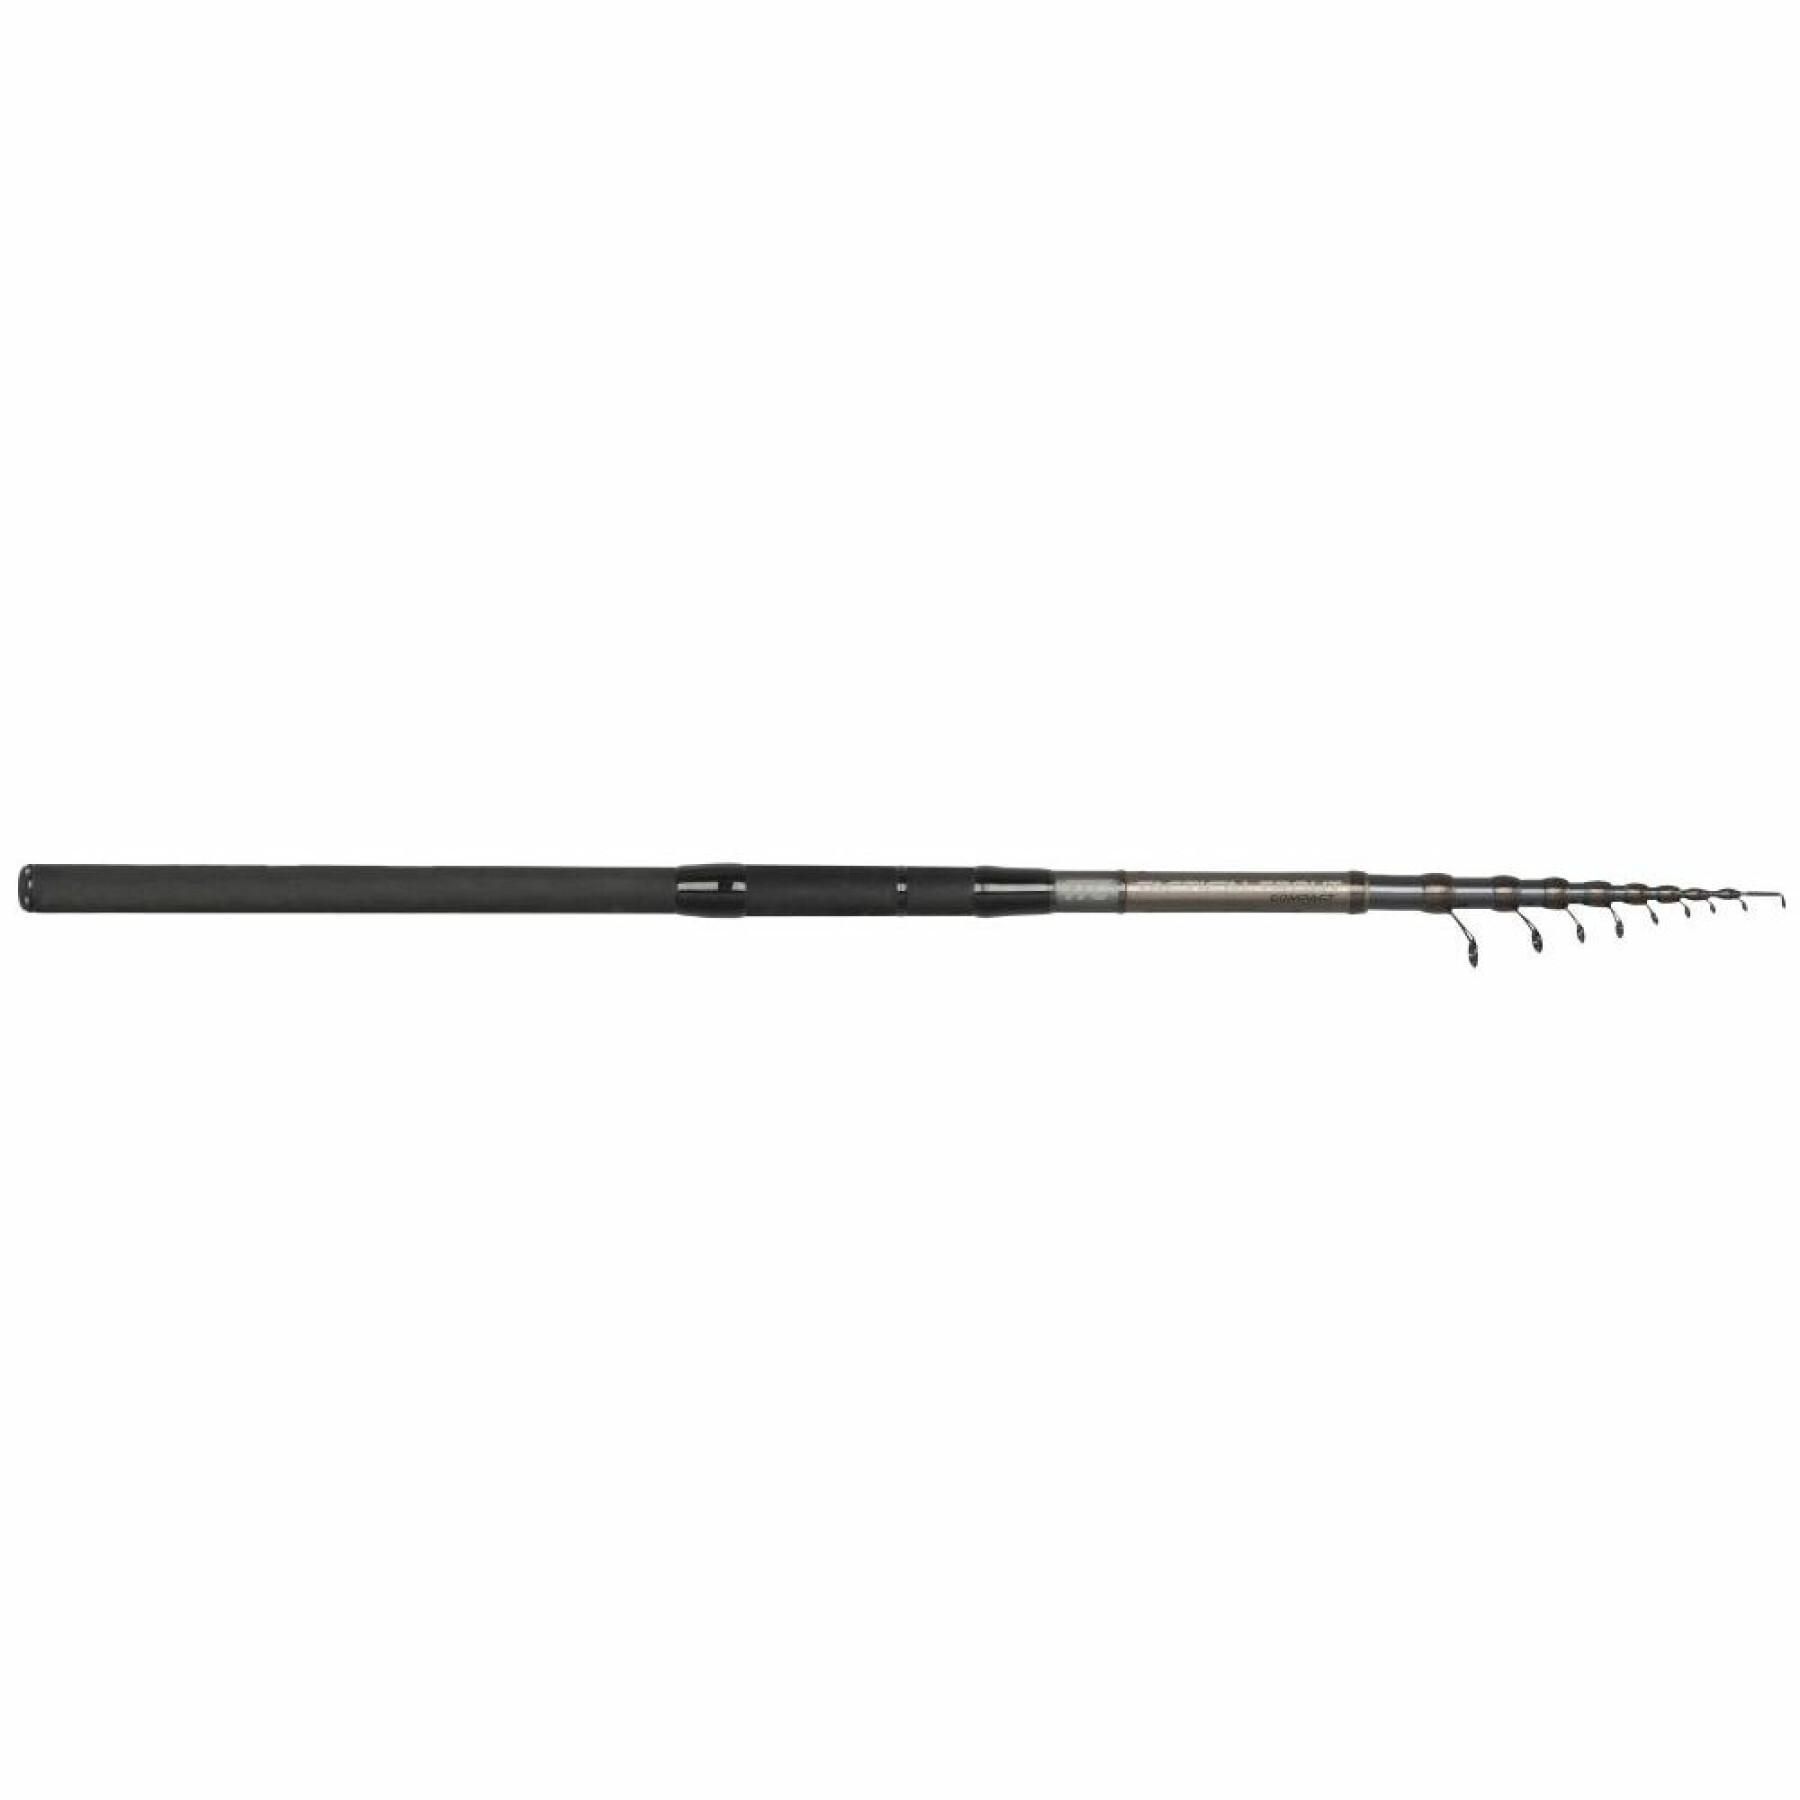 Spinning rod Spro tactical trout compact 5-25g